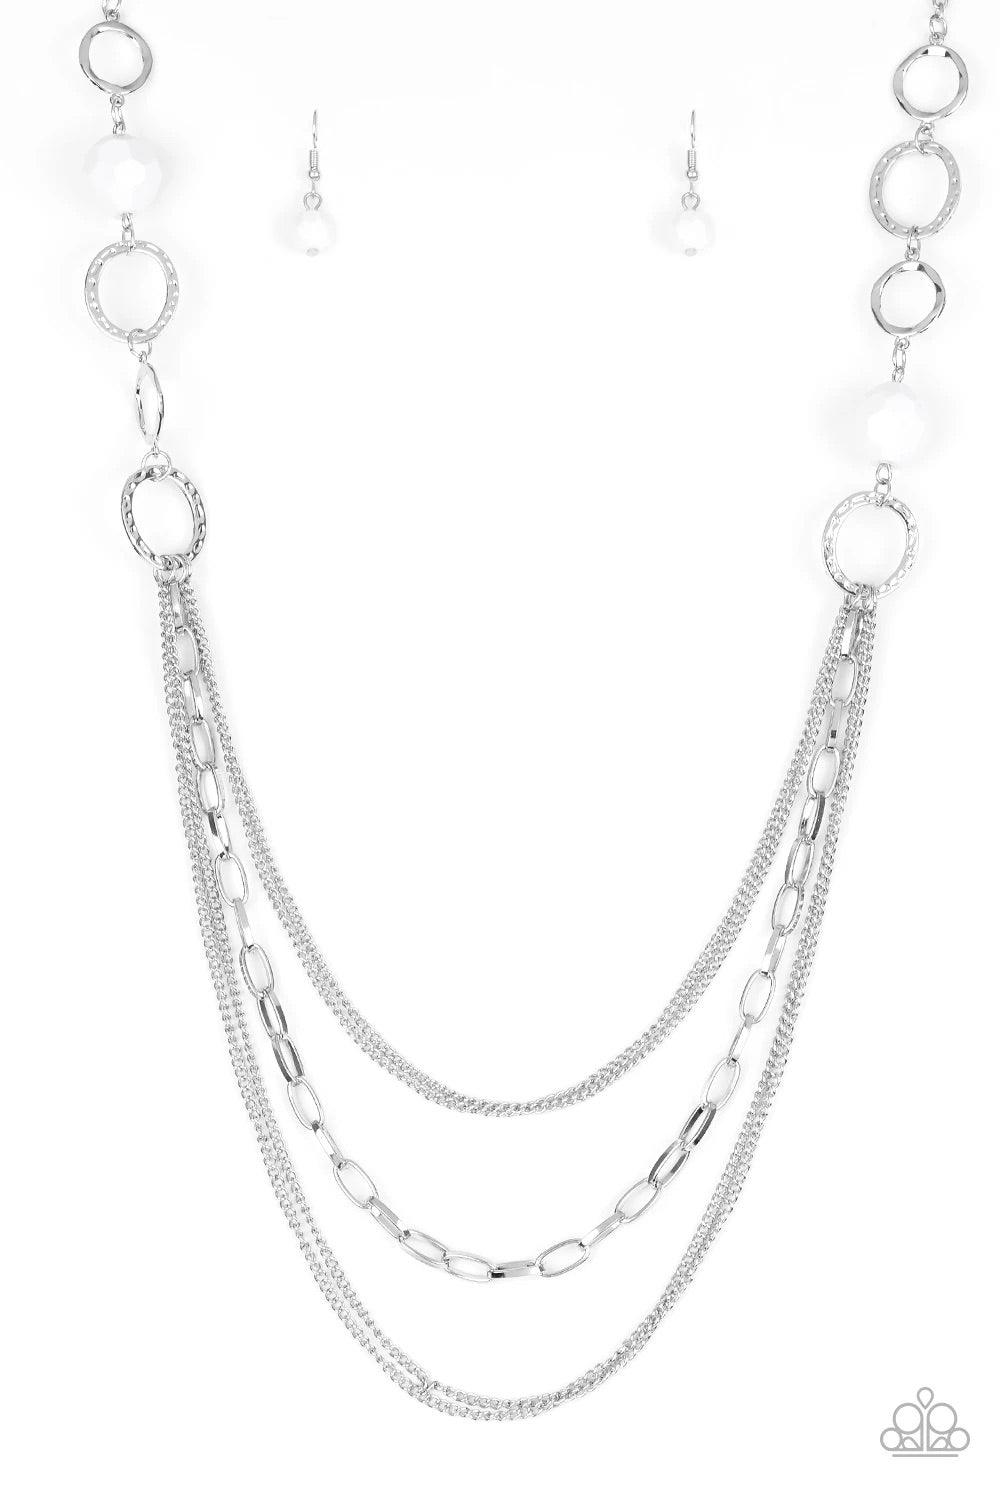 Paparazzi Accessories Margarita Masquerades - White Faceted white beads and hammered silver hoops give way to layers of mismatched silver chains for a whimsical look. Features an adjustable clasp closure. Sold as one individual necklace. Includes one pair